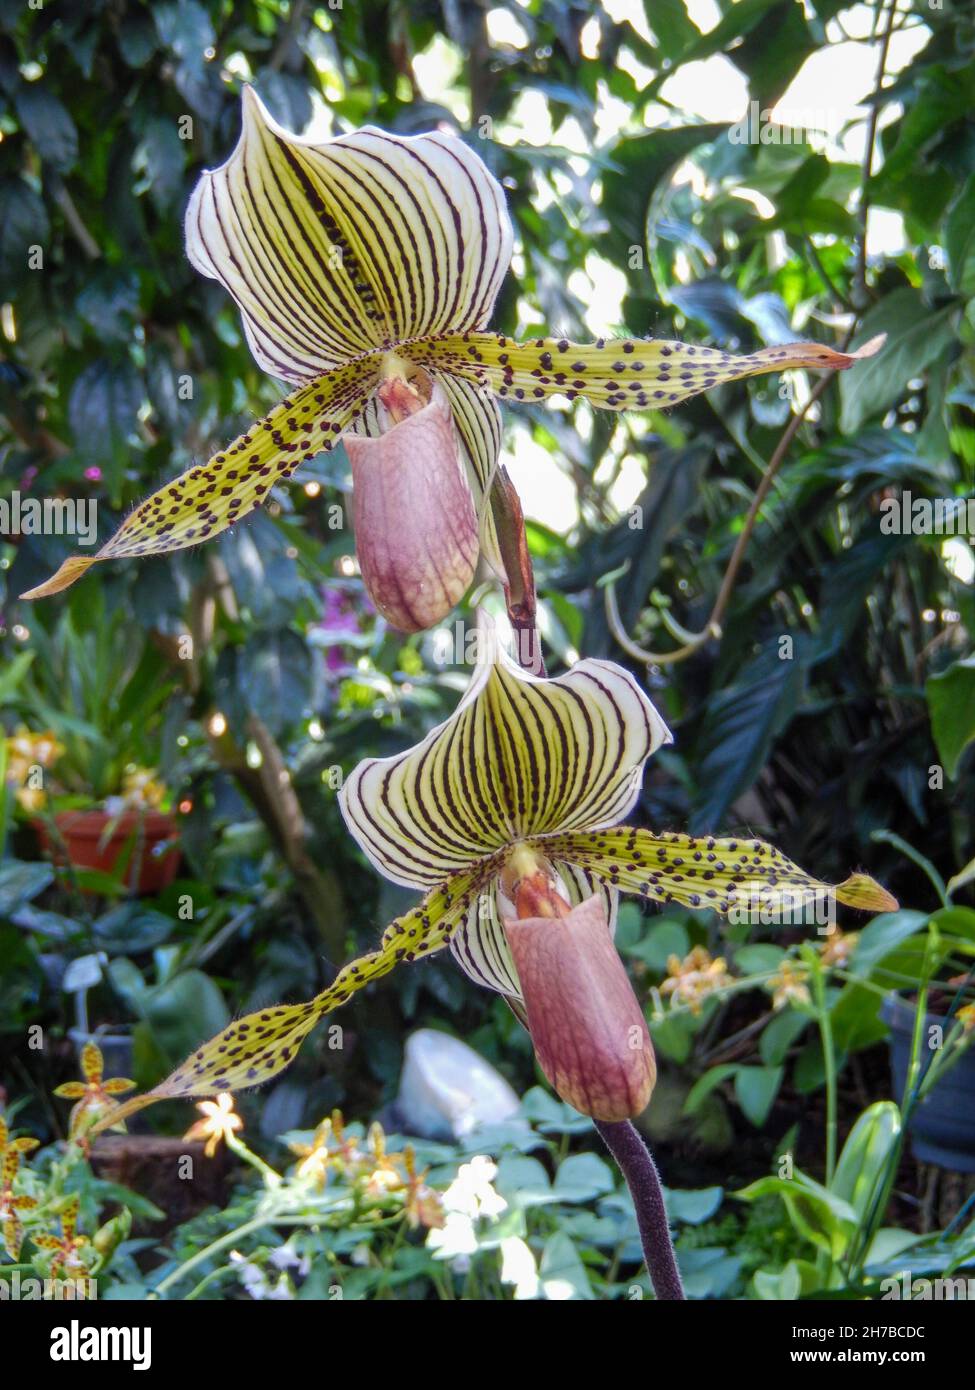 Selective focus shot of a paphiopedilum ciliolare flowering plant growing in the garden Stock Photo